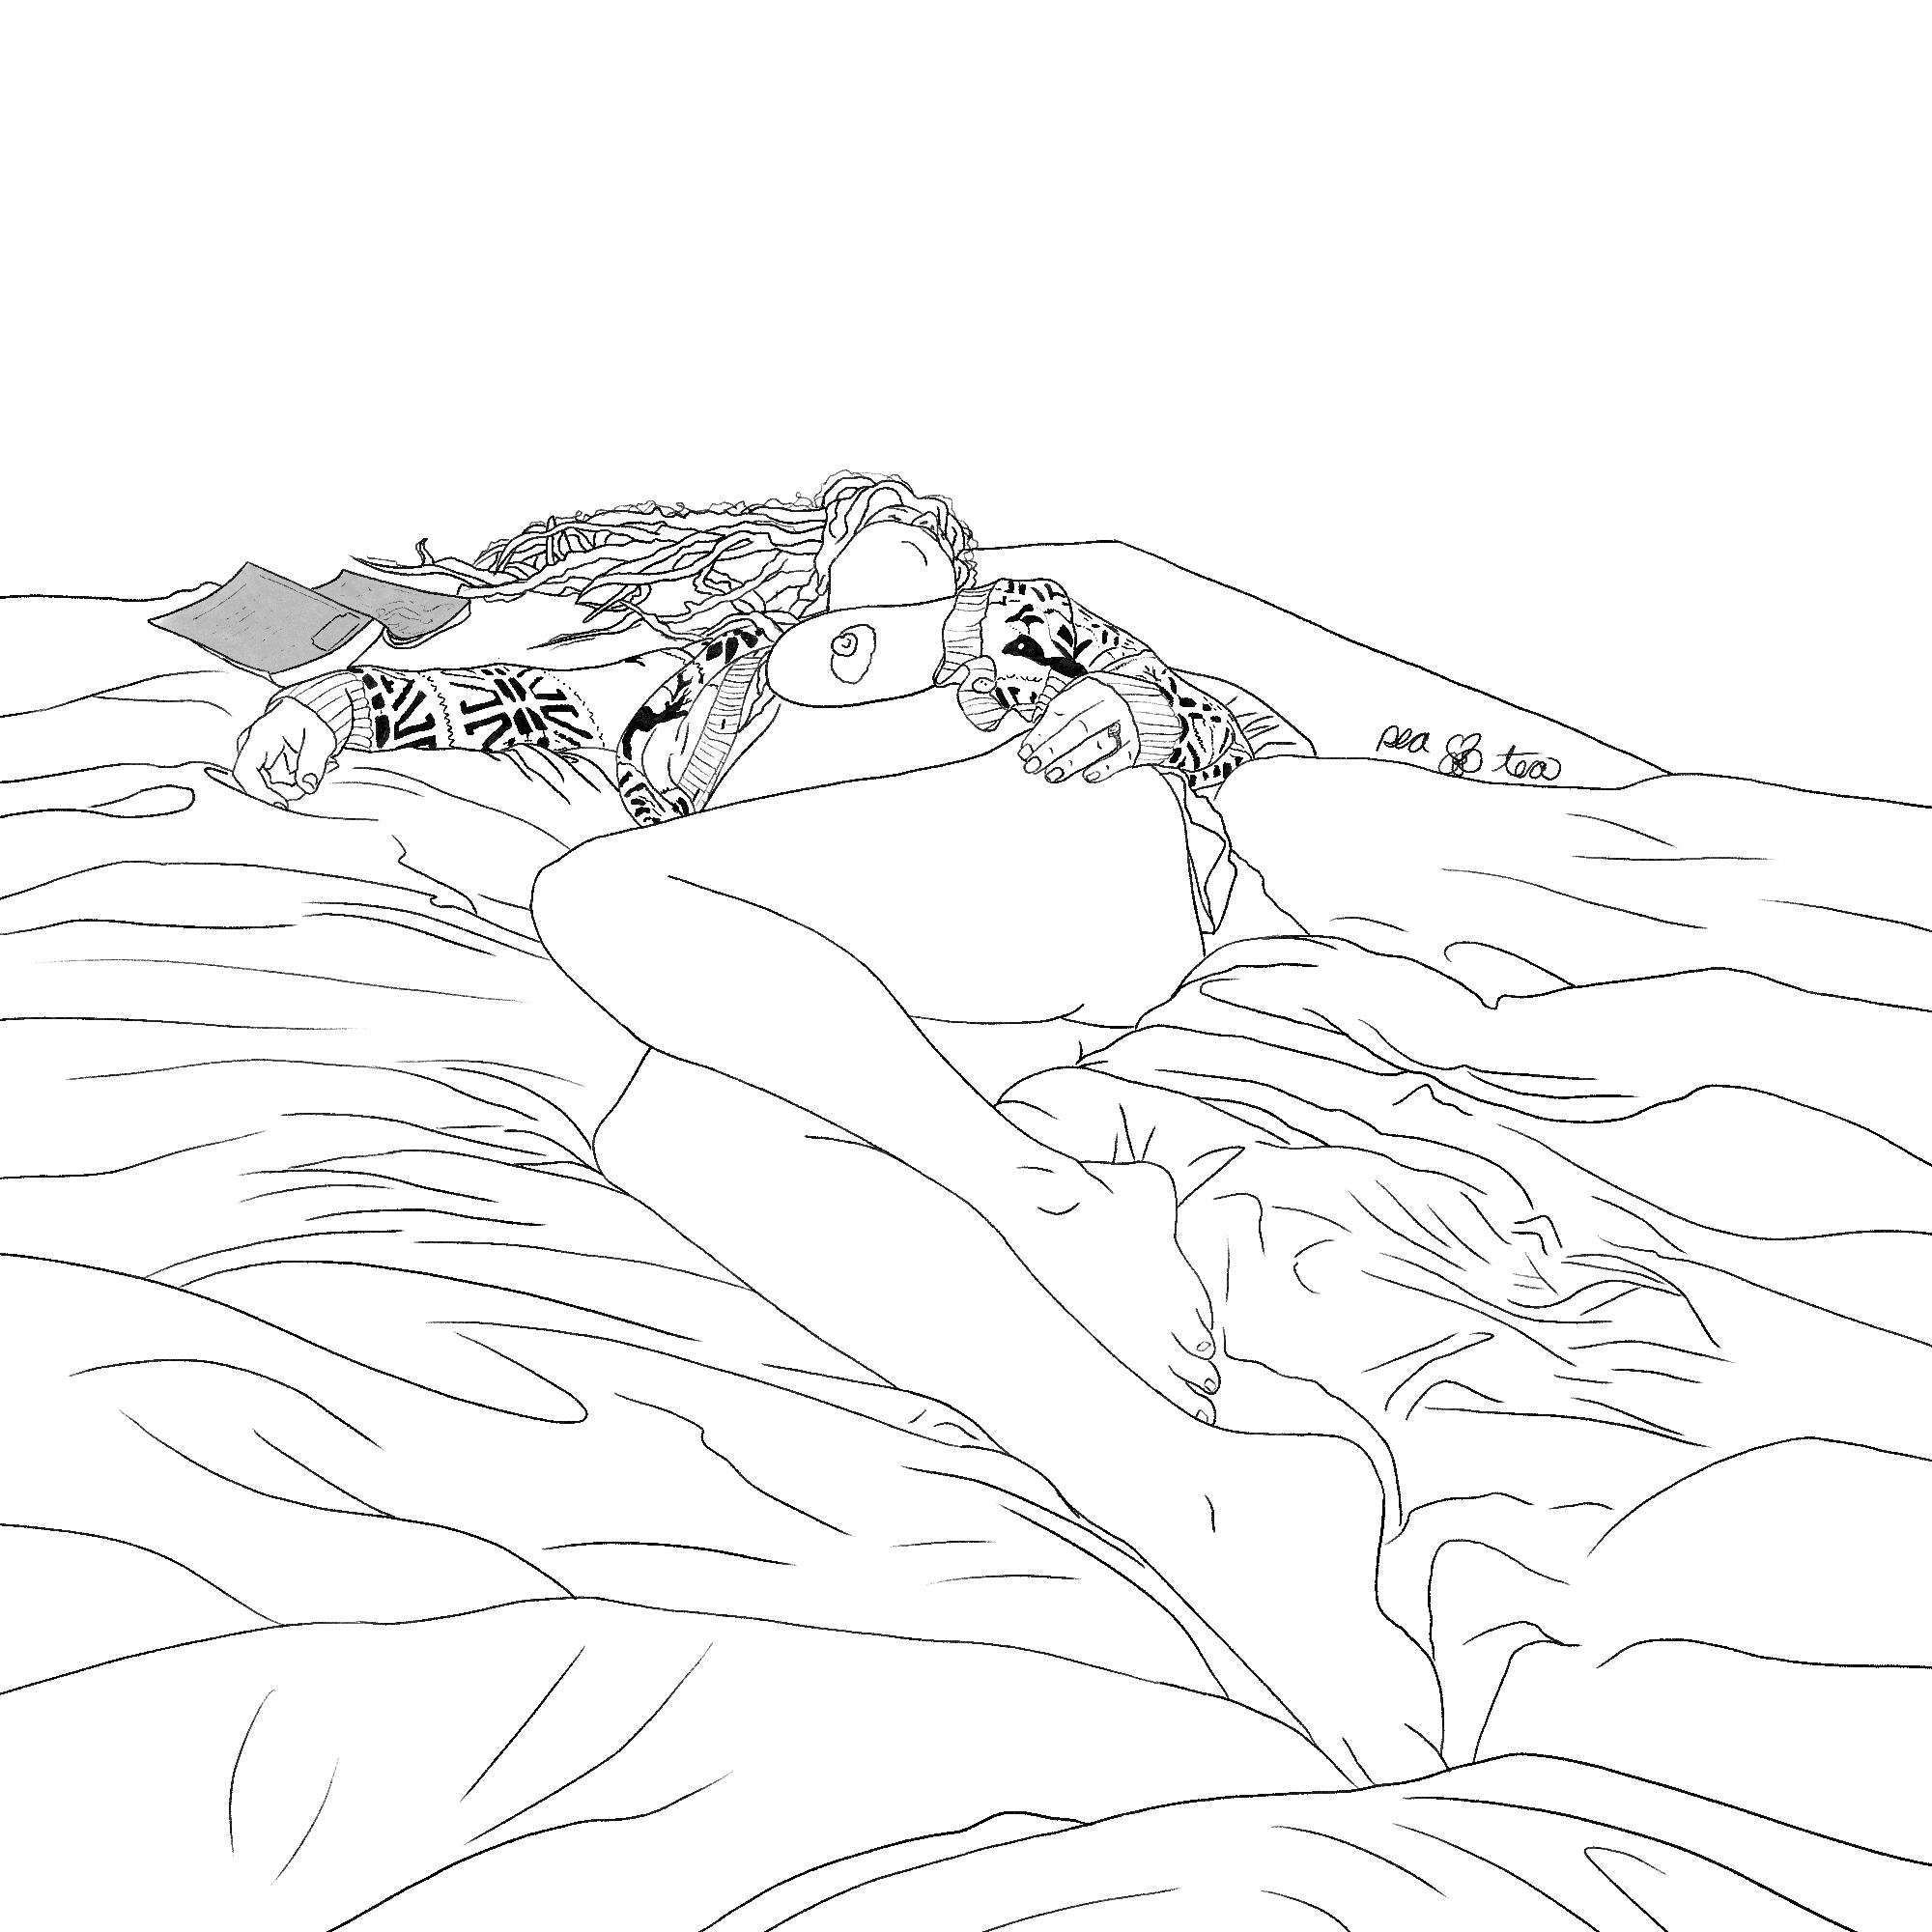 Pencil sketch of a nude woman in recline on a tousled bed. A book lays open, face down and forgotten near one outstretched arm as she sleeps.